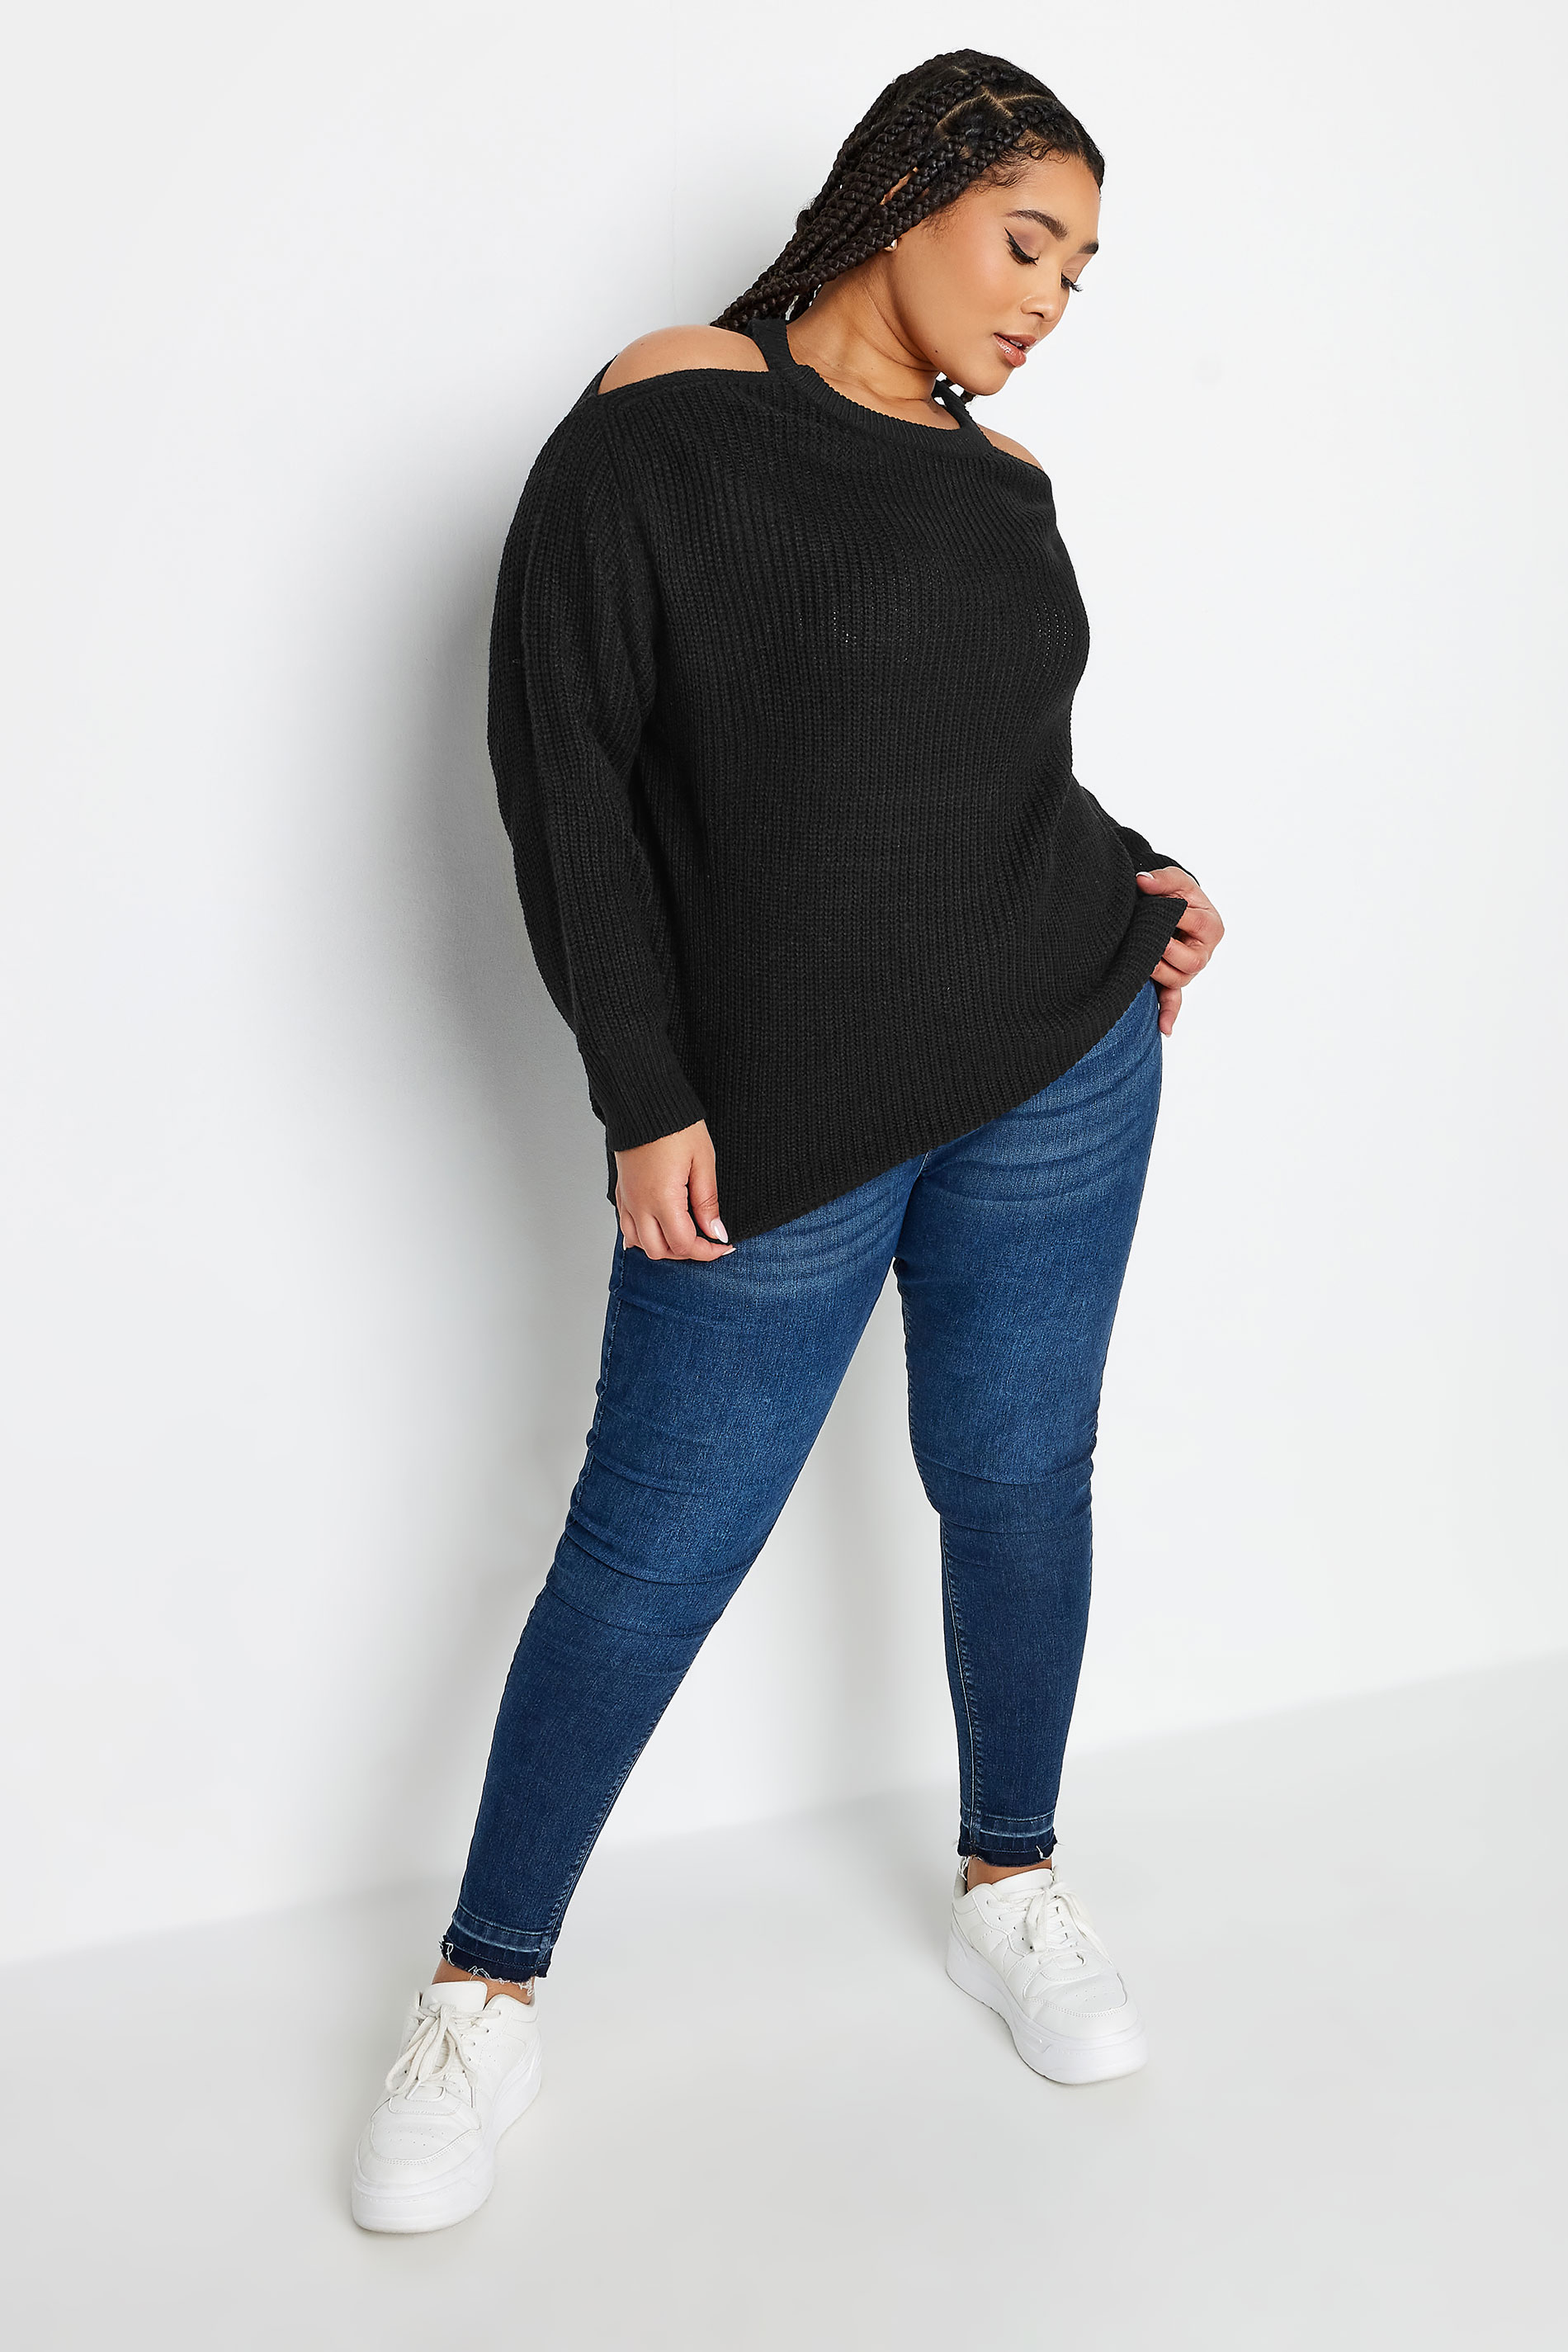 YOURS Plus Size Black Cold Shoulder Knitted Jumper | Yours Clothing 2